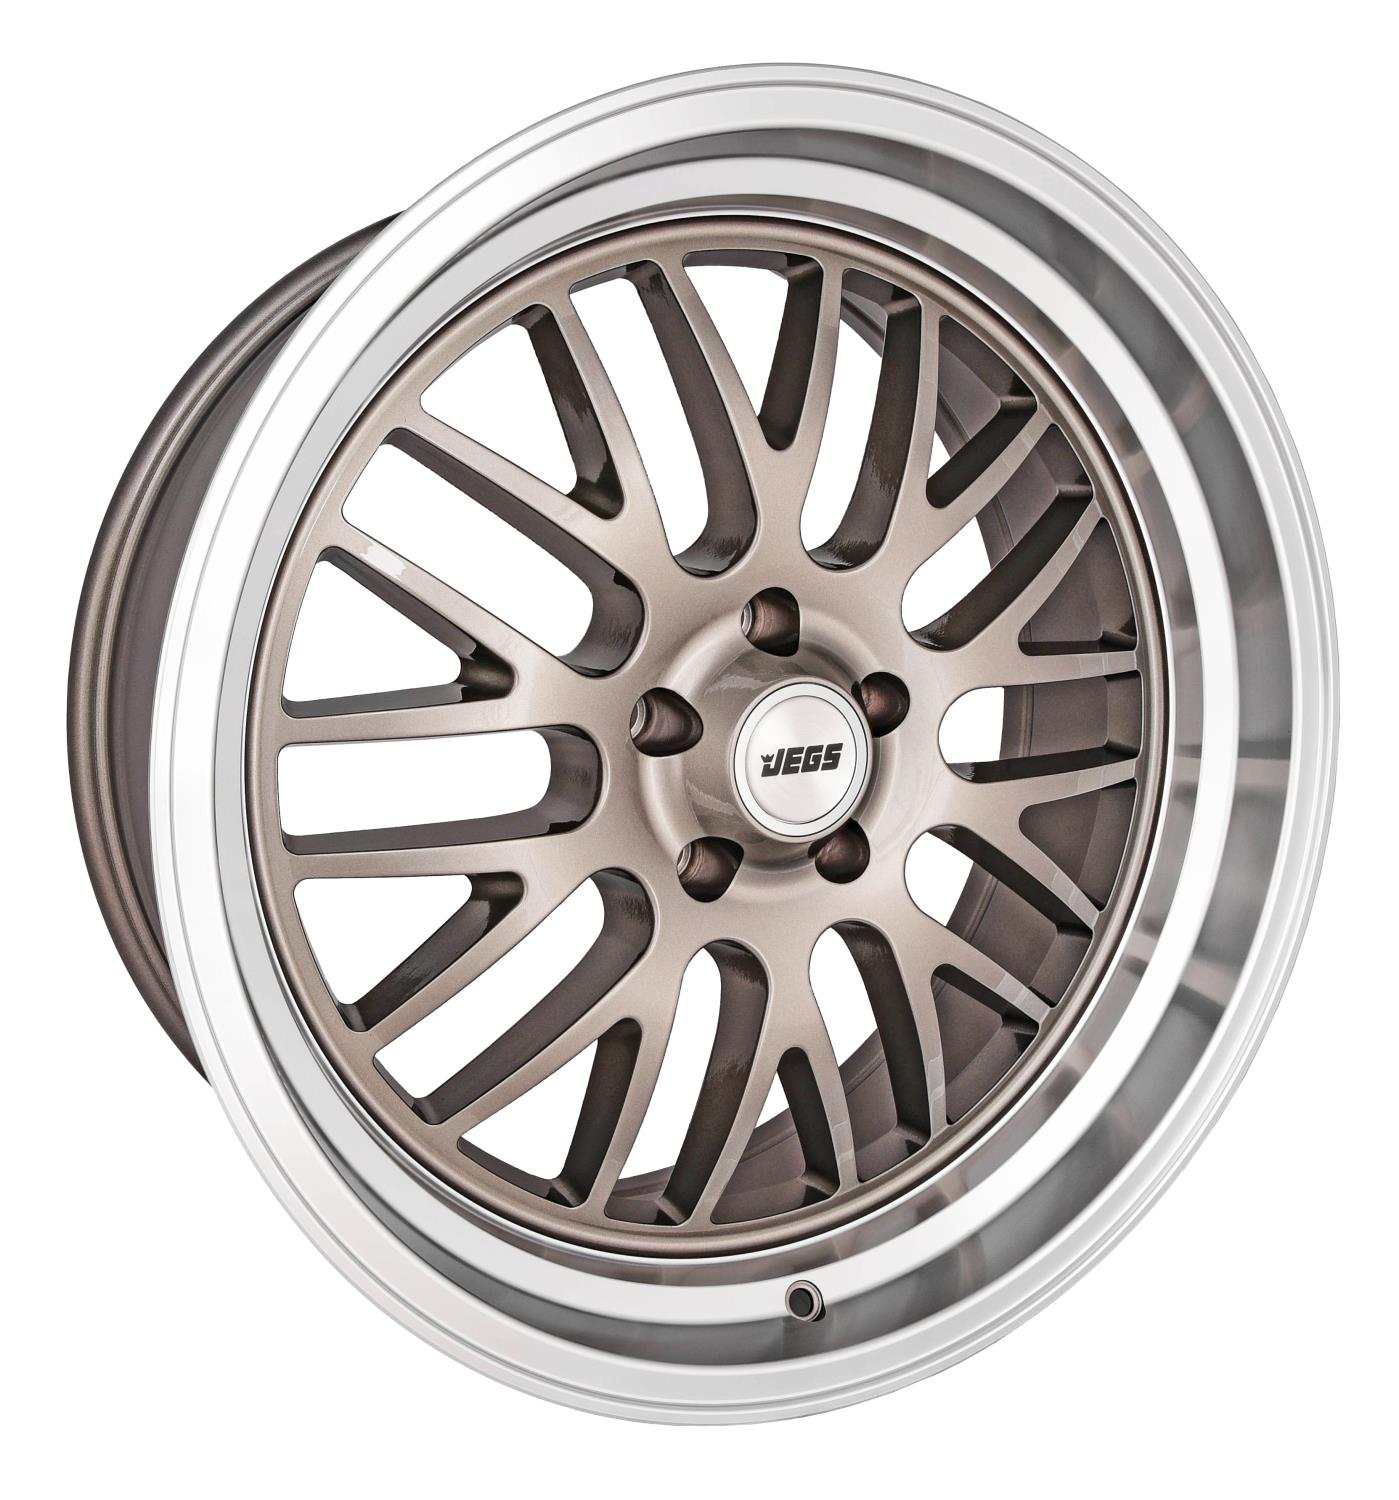 JV-2 Wheel [Size: 18" x 8"] Grey with Milled Outer Lip